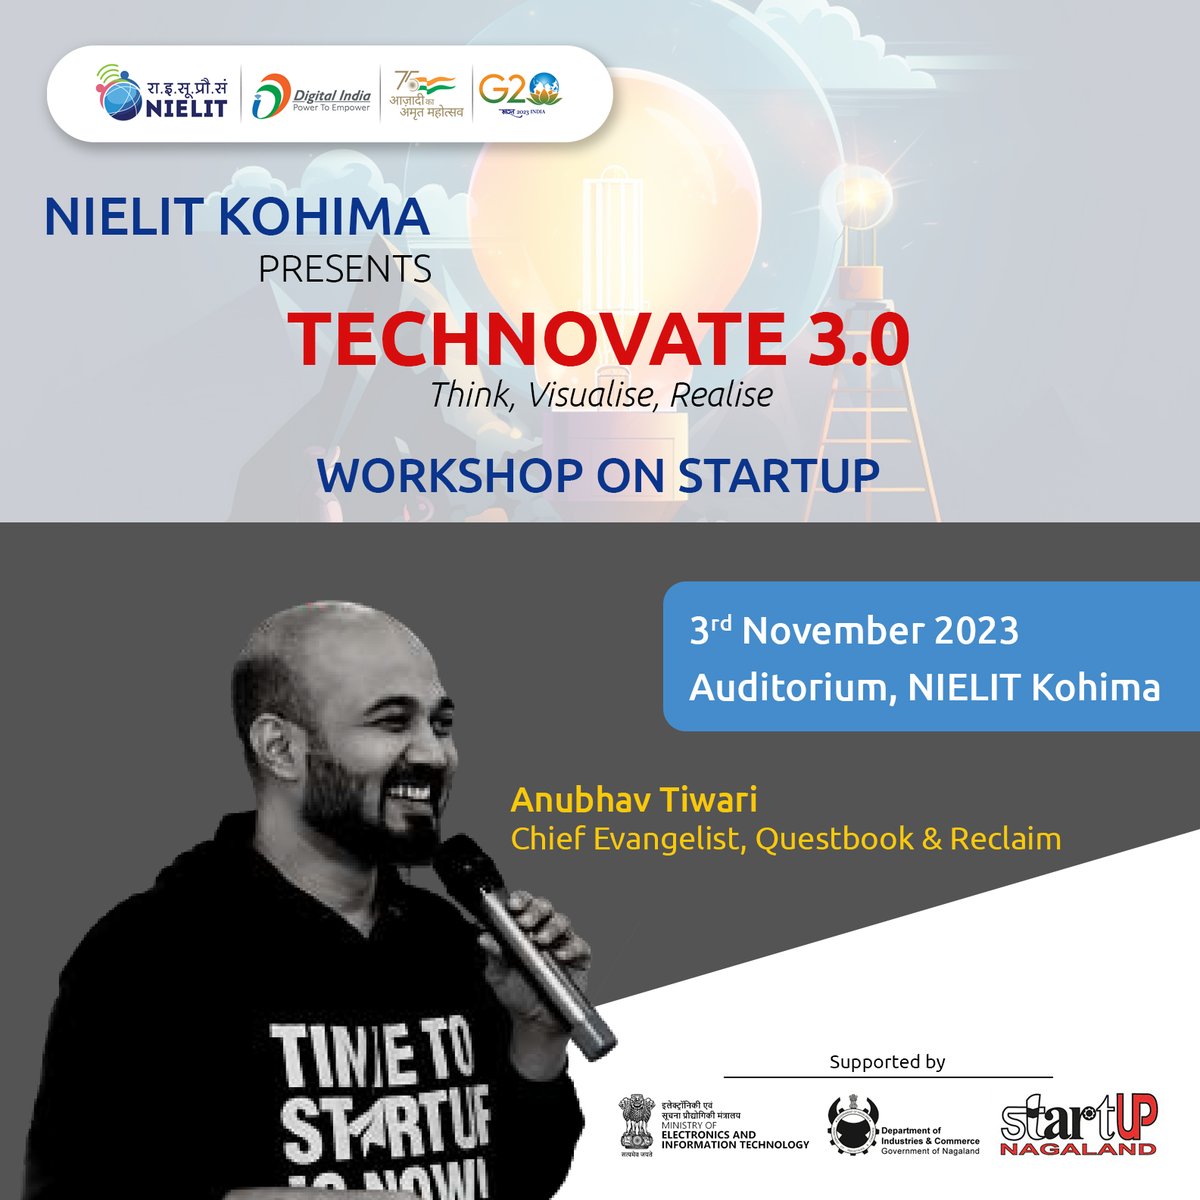 Ready to turn your ideas into reality? Join us at our Startup Workshop and embark on your entrepreneurial journey. Discover the tools, insights, and inspiration you need to launch your dream venture. @NIELITIndia @startupnagaland @industries_naga @Rajeev_GoI